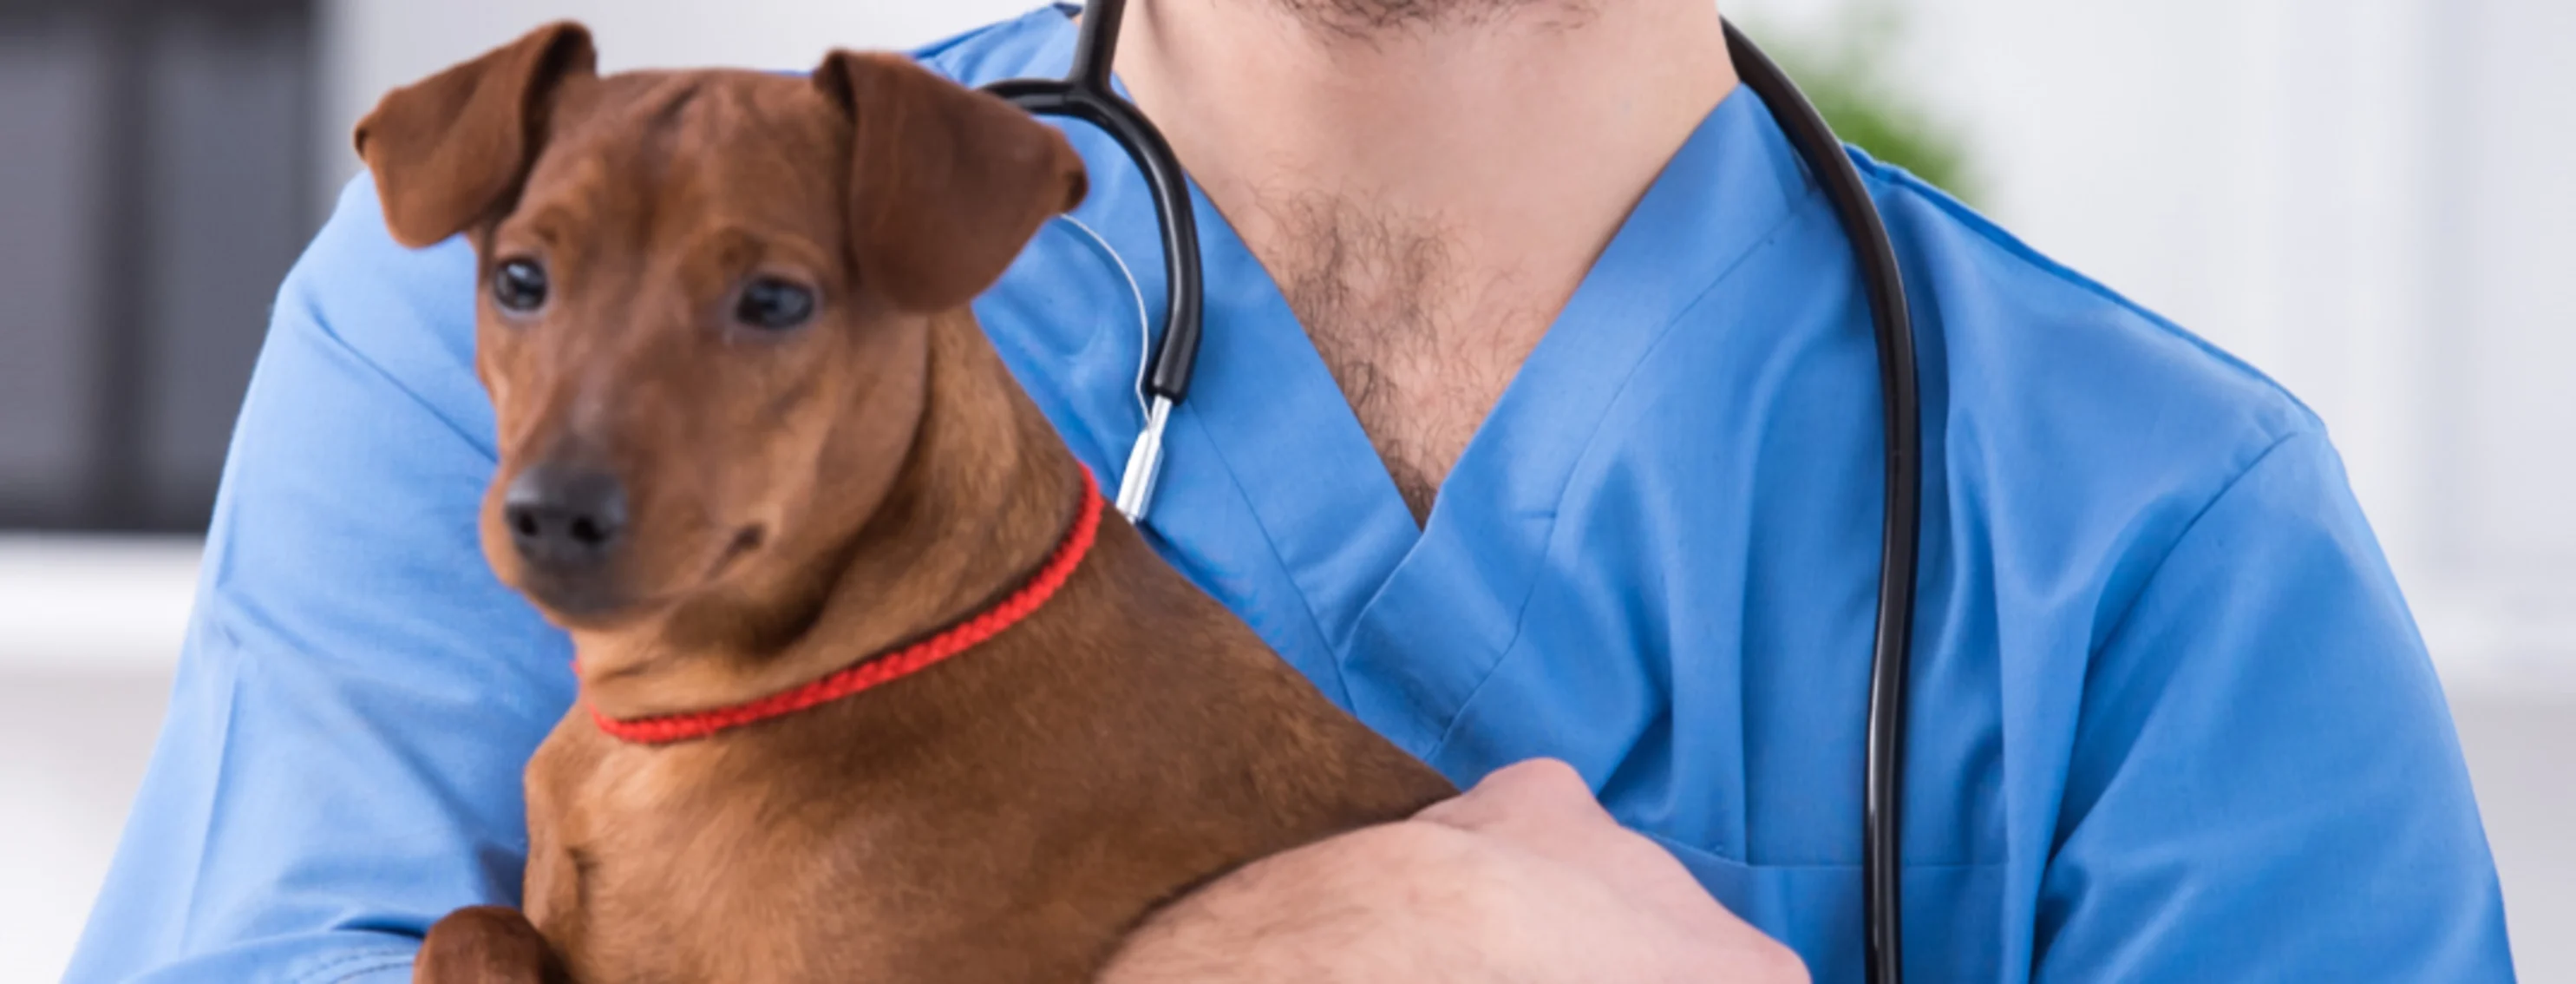 Veterinarian Holding a Brown Dog in a Clinic